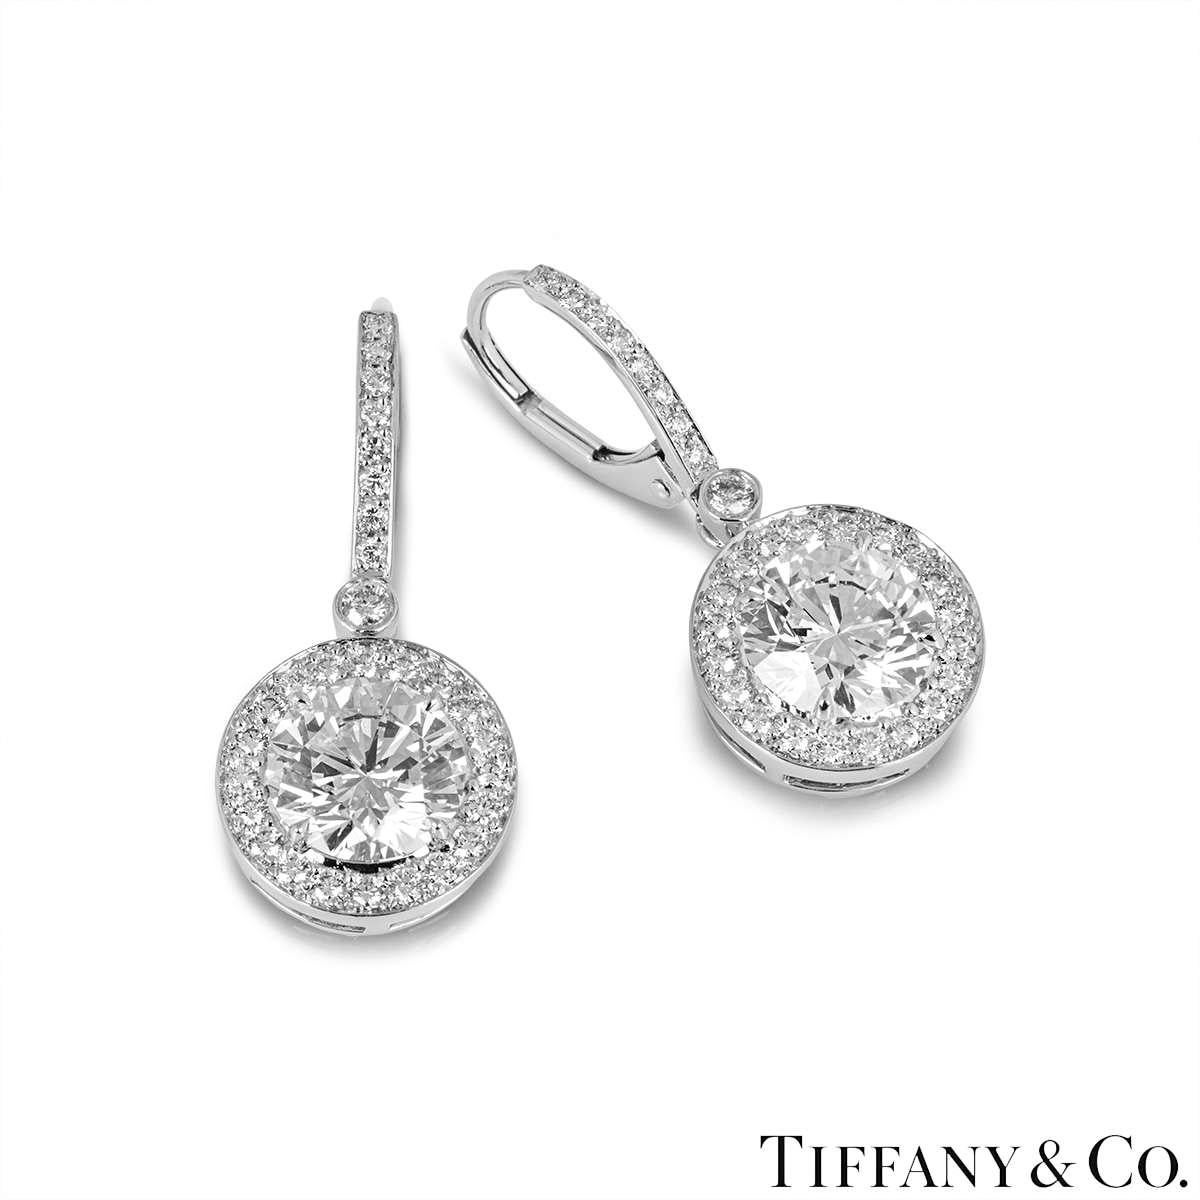 A magnificent pair of platinum diamond earrings by Tiffany & Co. Each earring is set with a round brilliant cut diamond, complemented by a halo of pave set diamonds and a diamond set drop. The first diamond weighs 1.51ct, G colour and VS2 clarity.